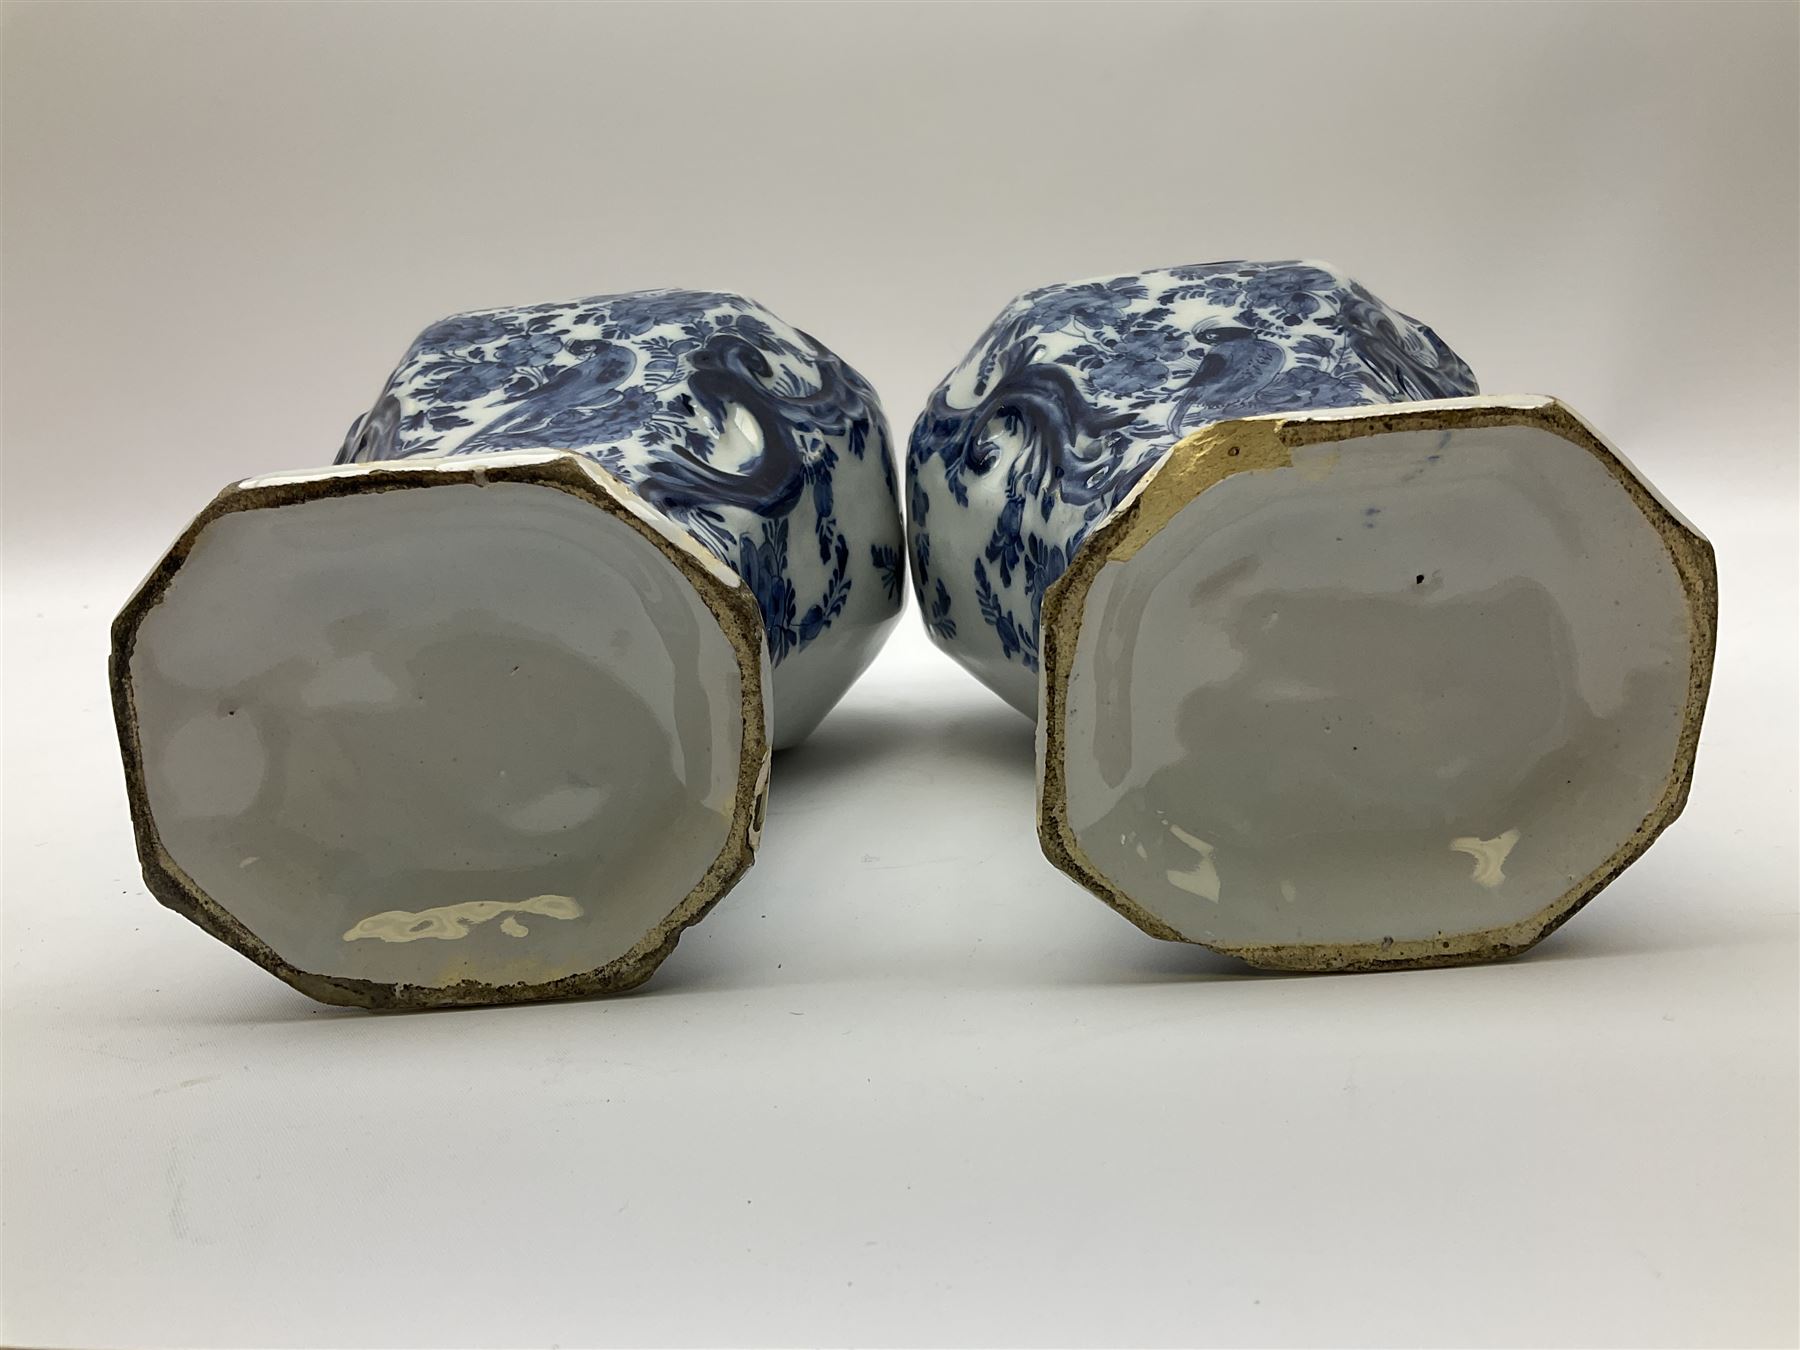 Pair of 19th century Delft blue and white vases - Image 16 of 16